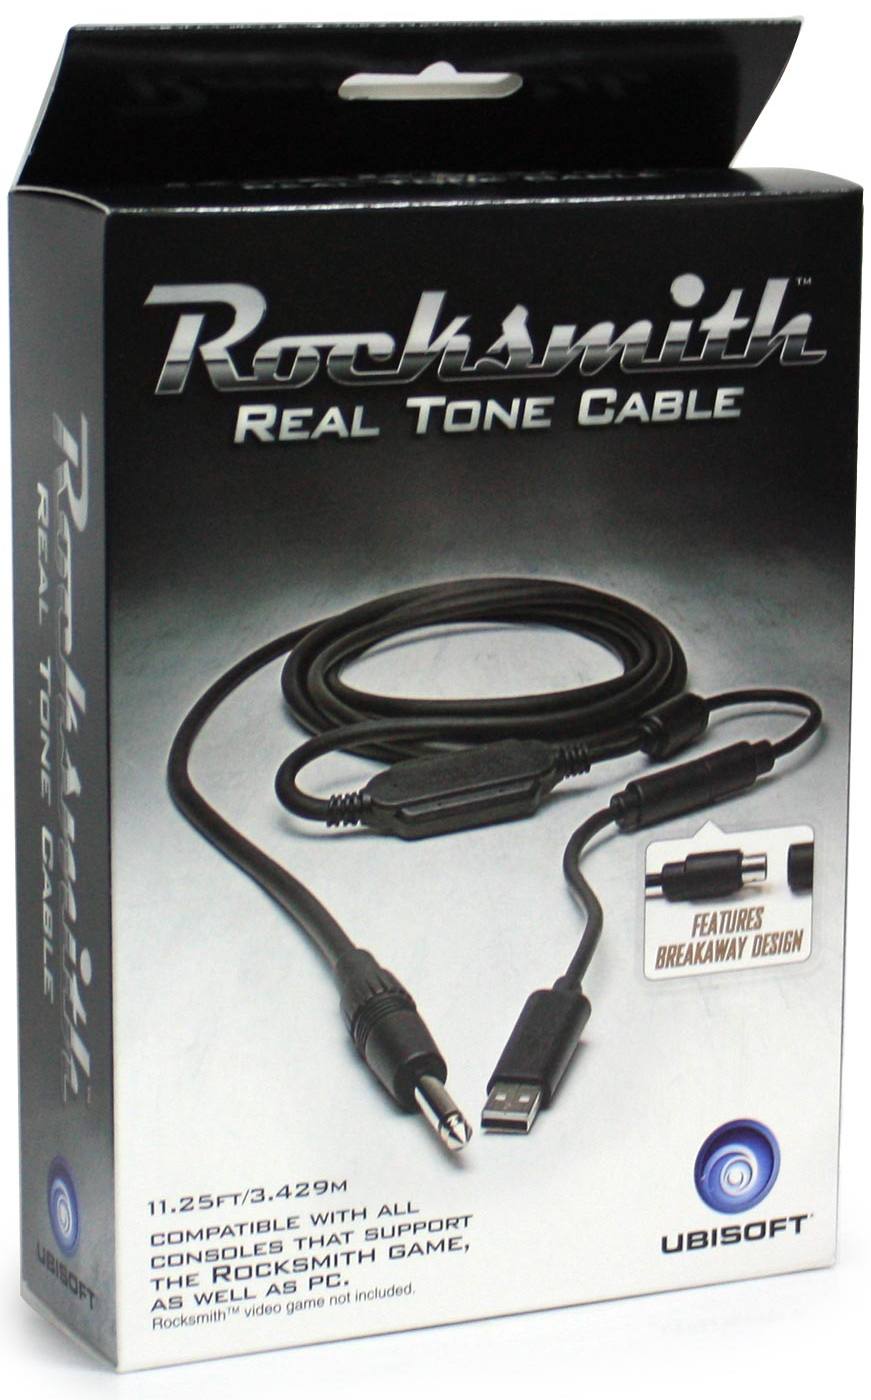 Rocksmith Real Tone Cable PlayStation 3, Xbox360